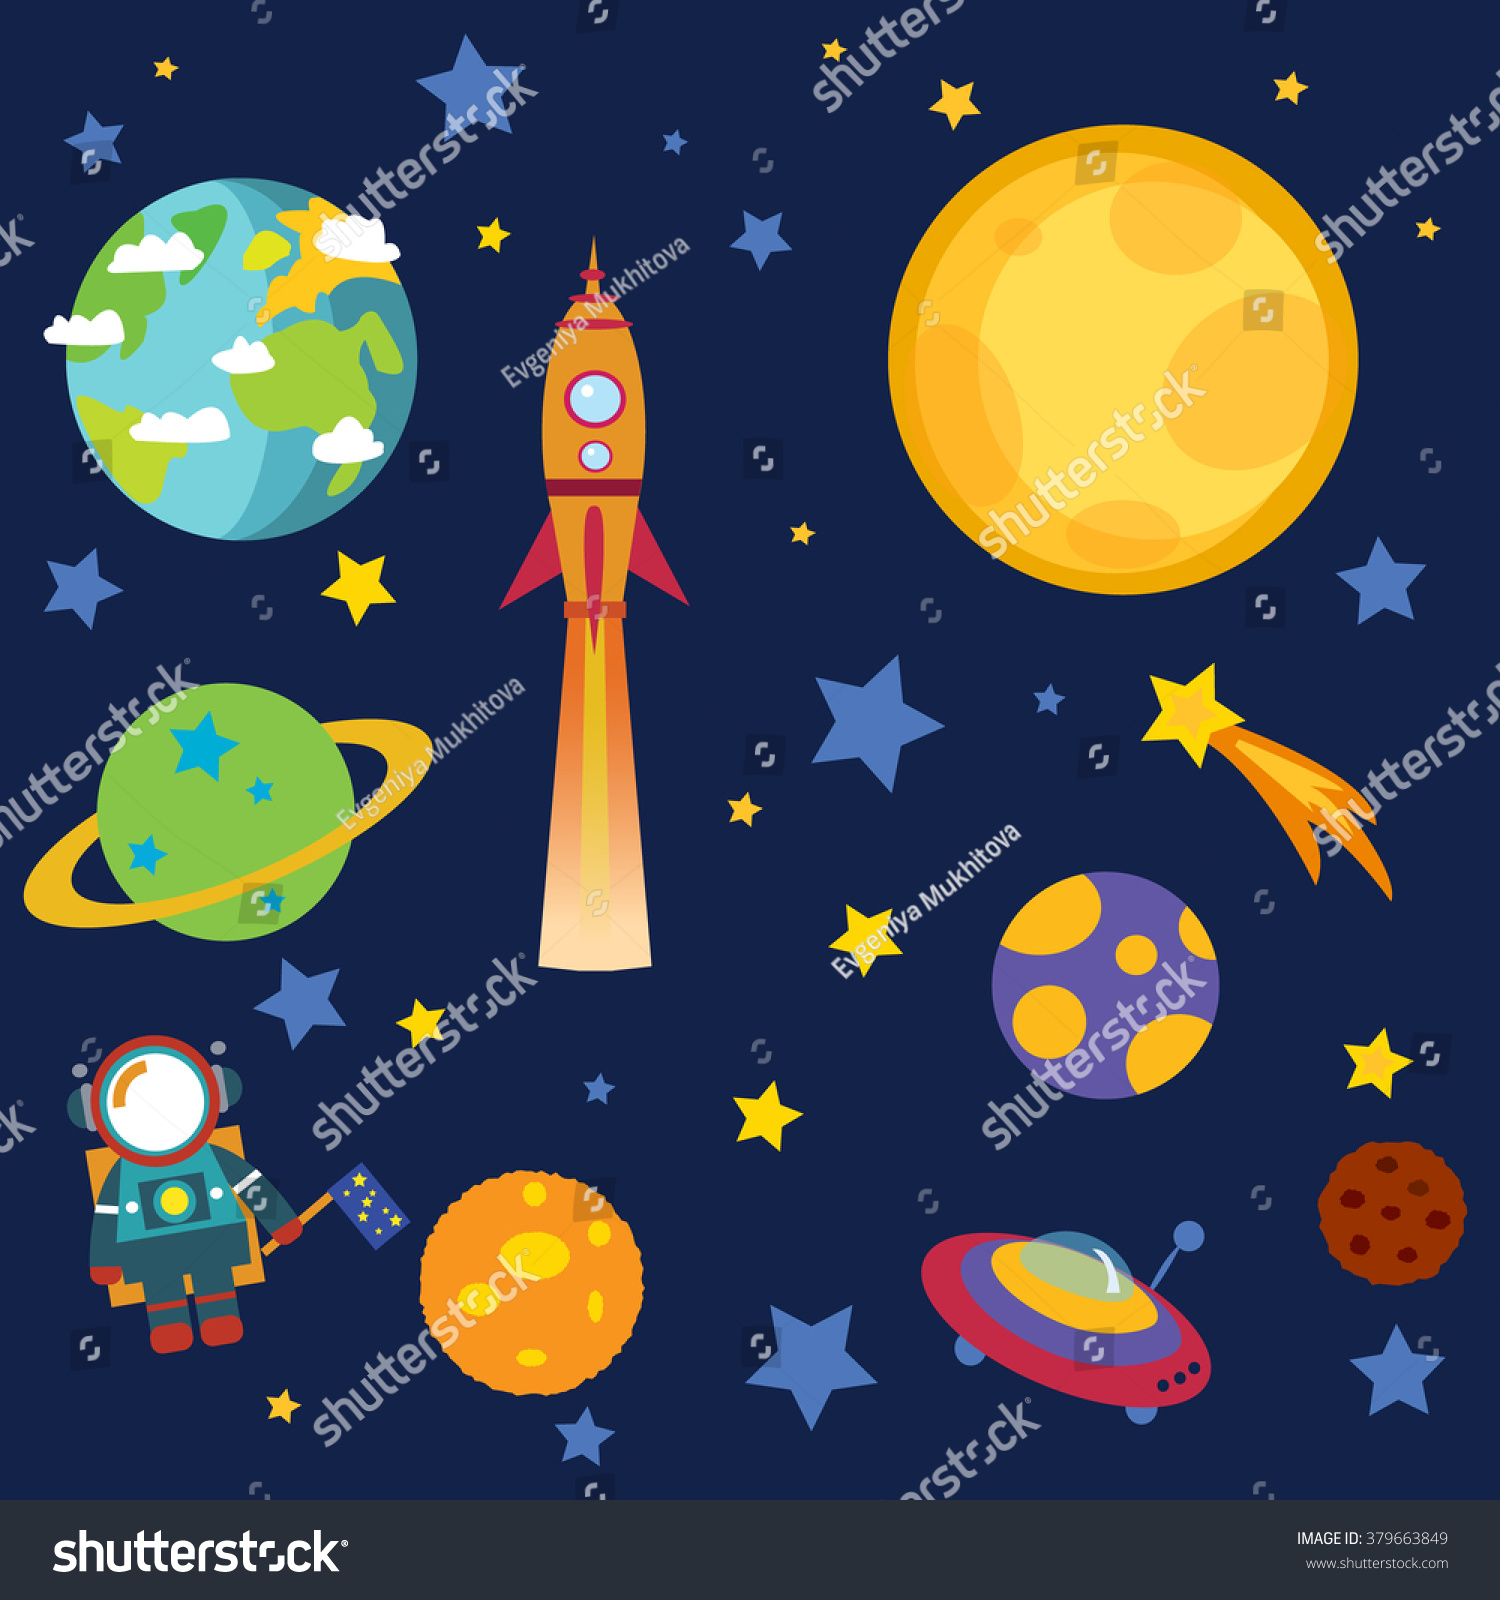 Download Outer Space Stars Moon Planets Astronaut Stock Vector ...